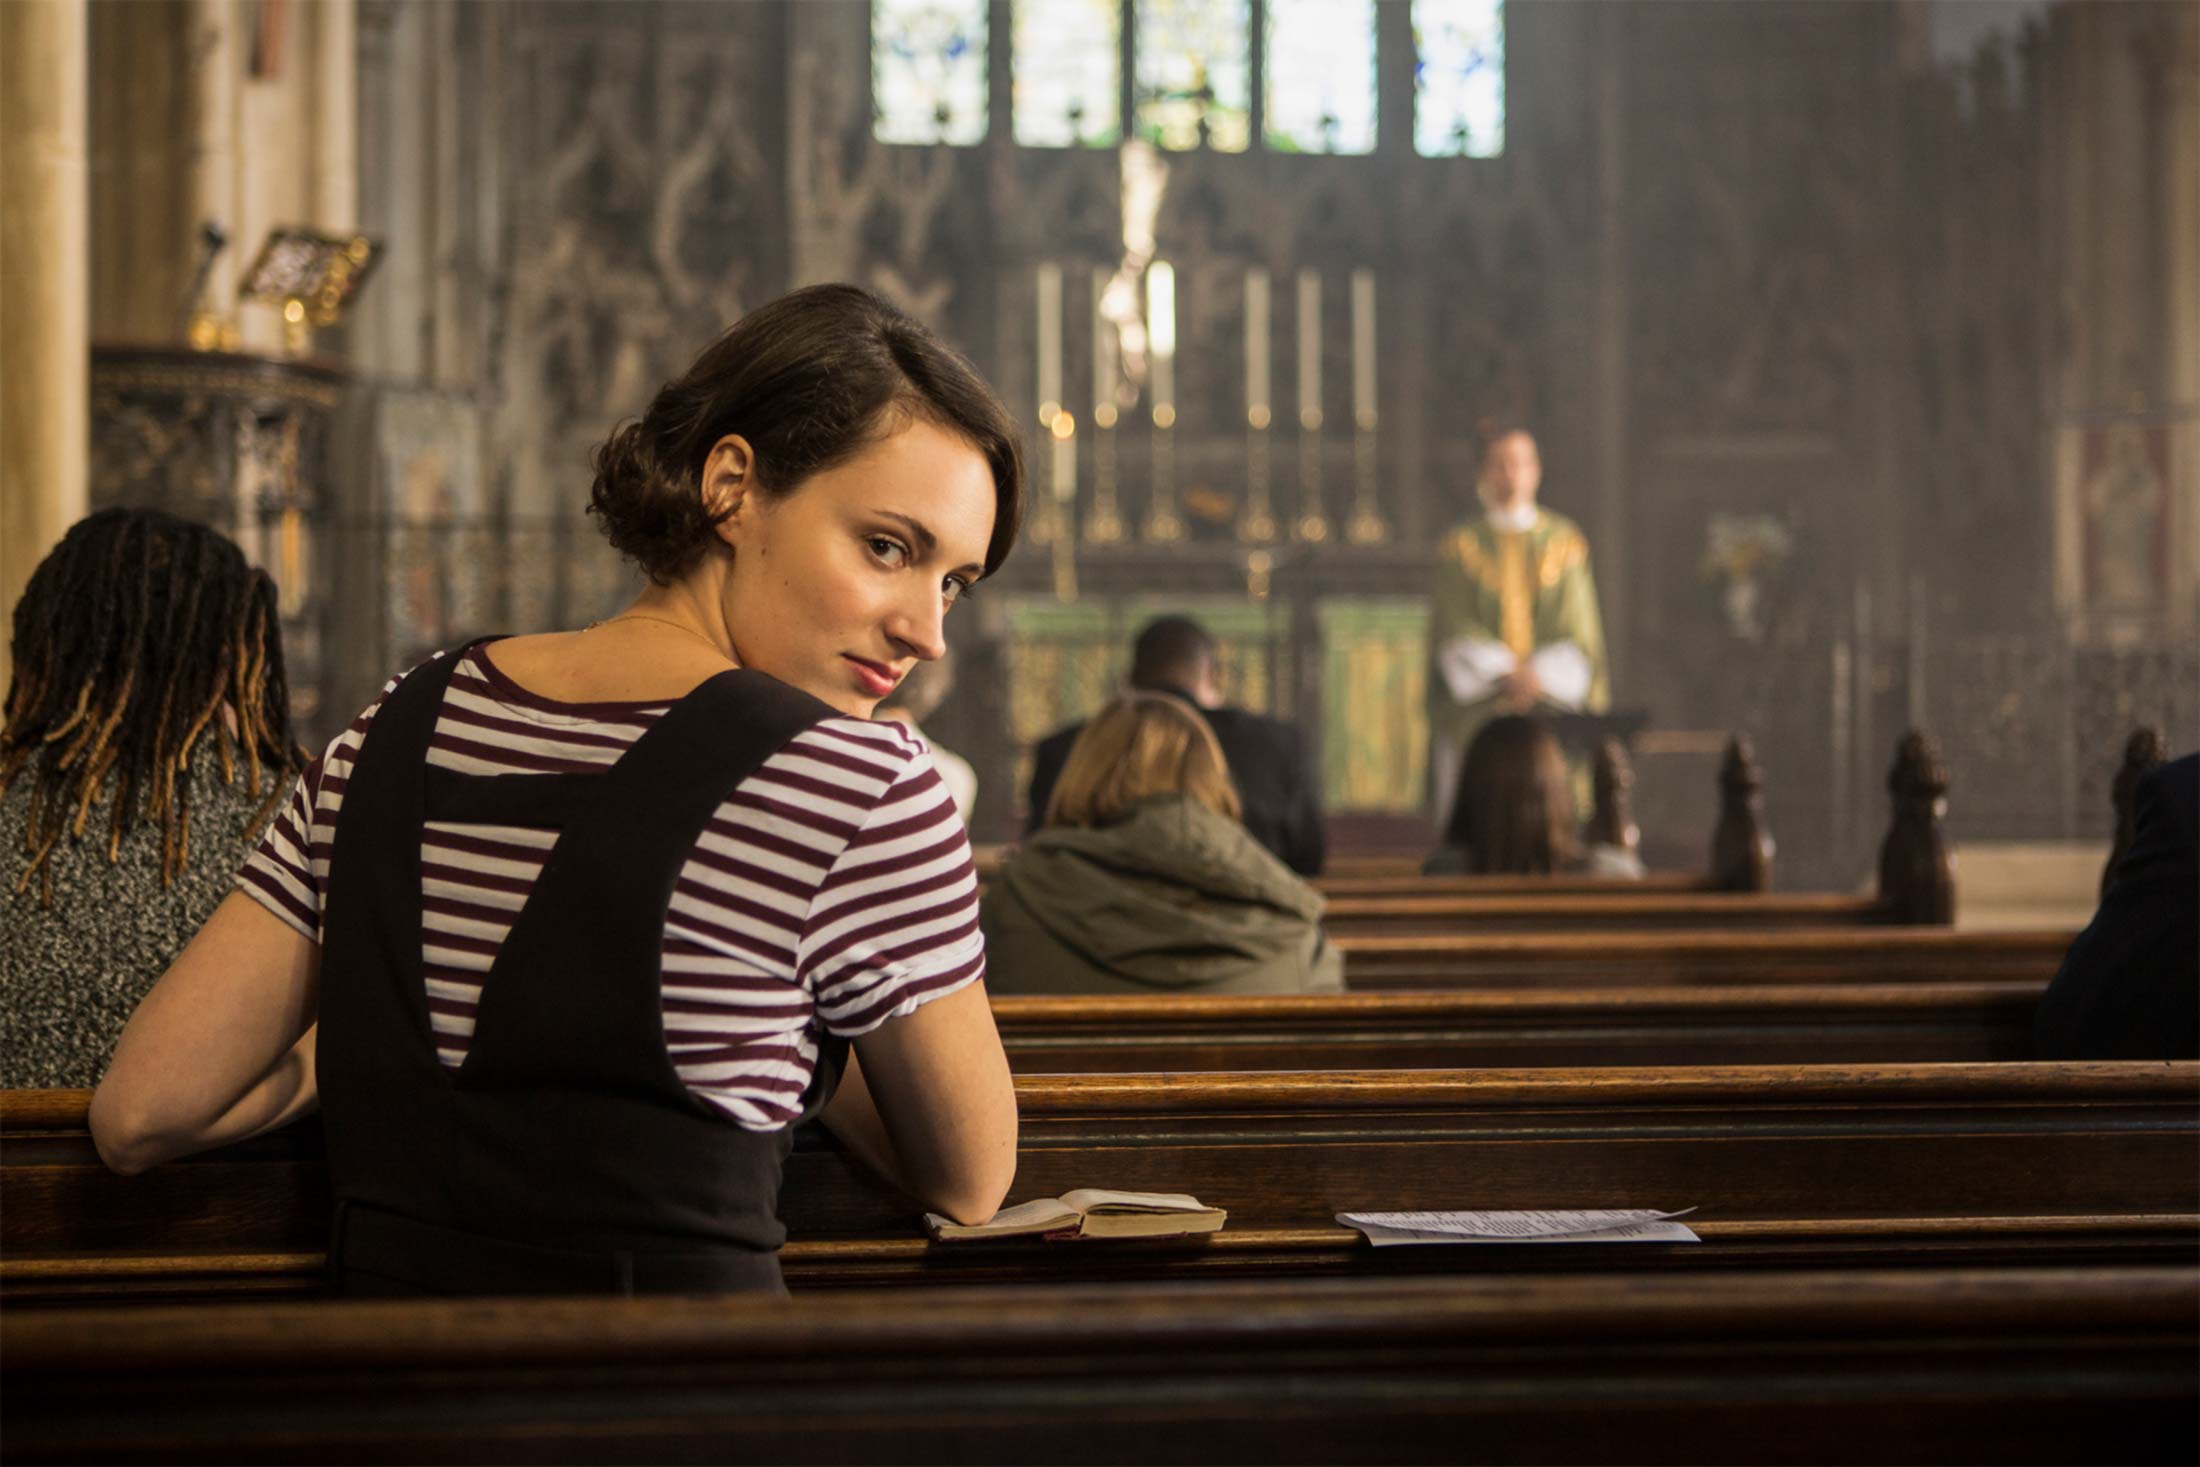 In this still from Fleabag, Phoebe Waller-Bridge breaks the fourth wall by staring directly into the camera while sitting in a church pew.